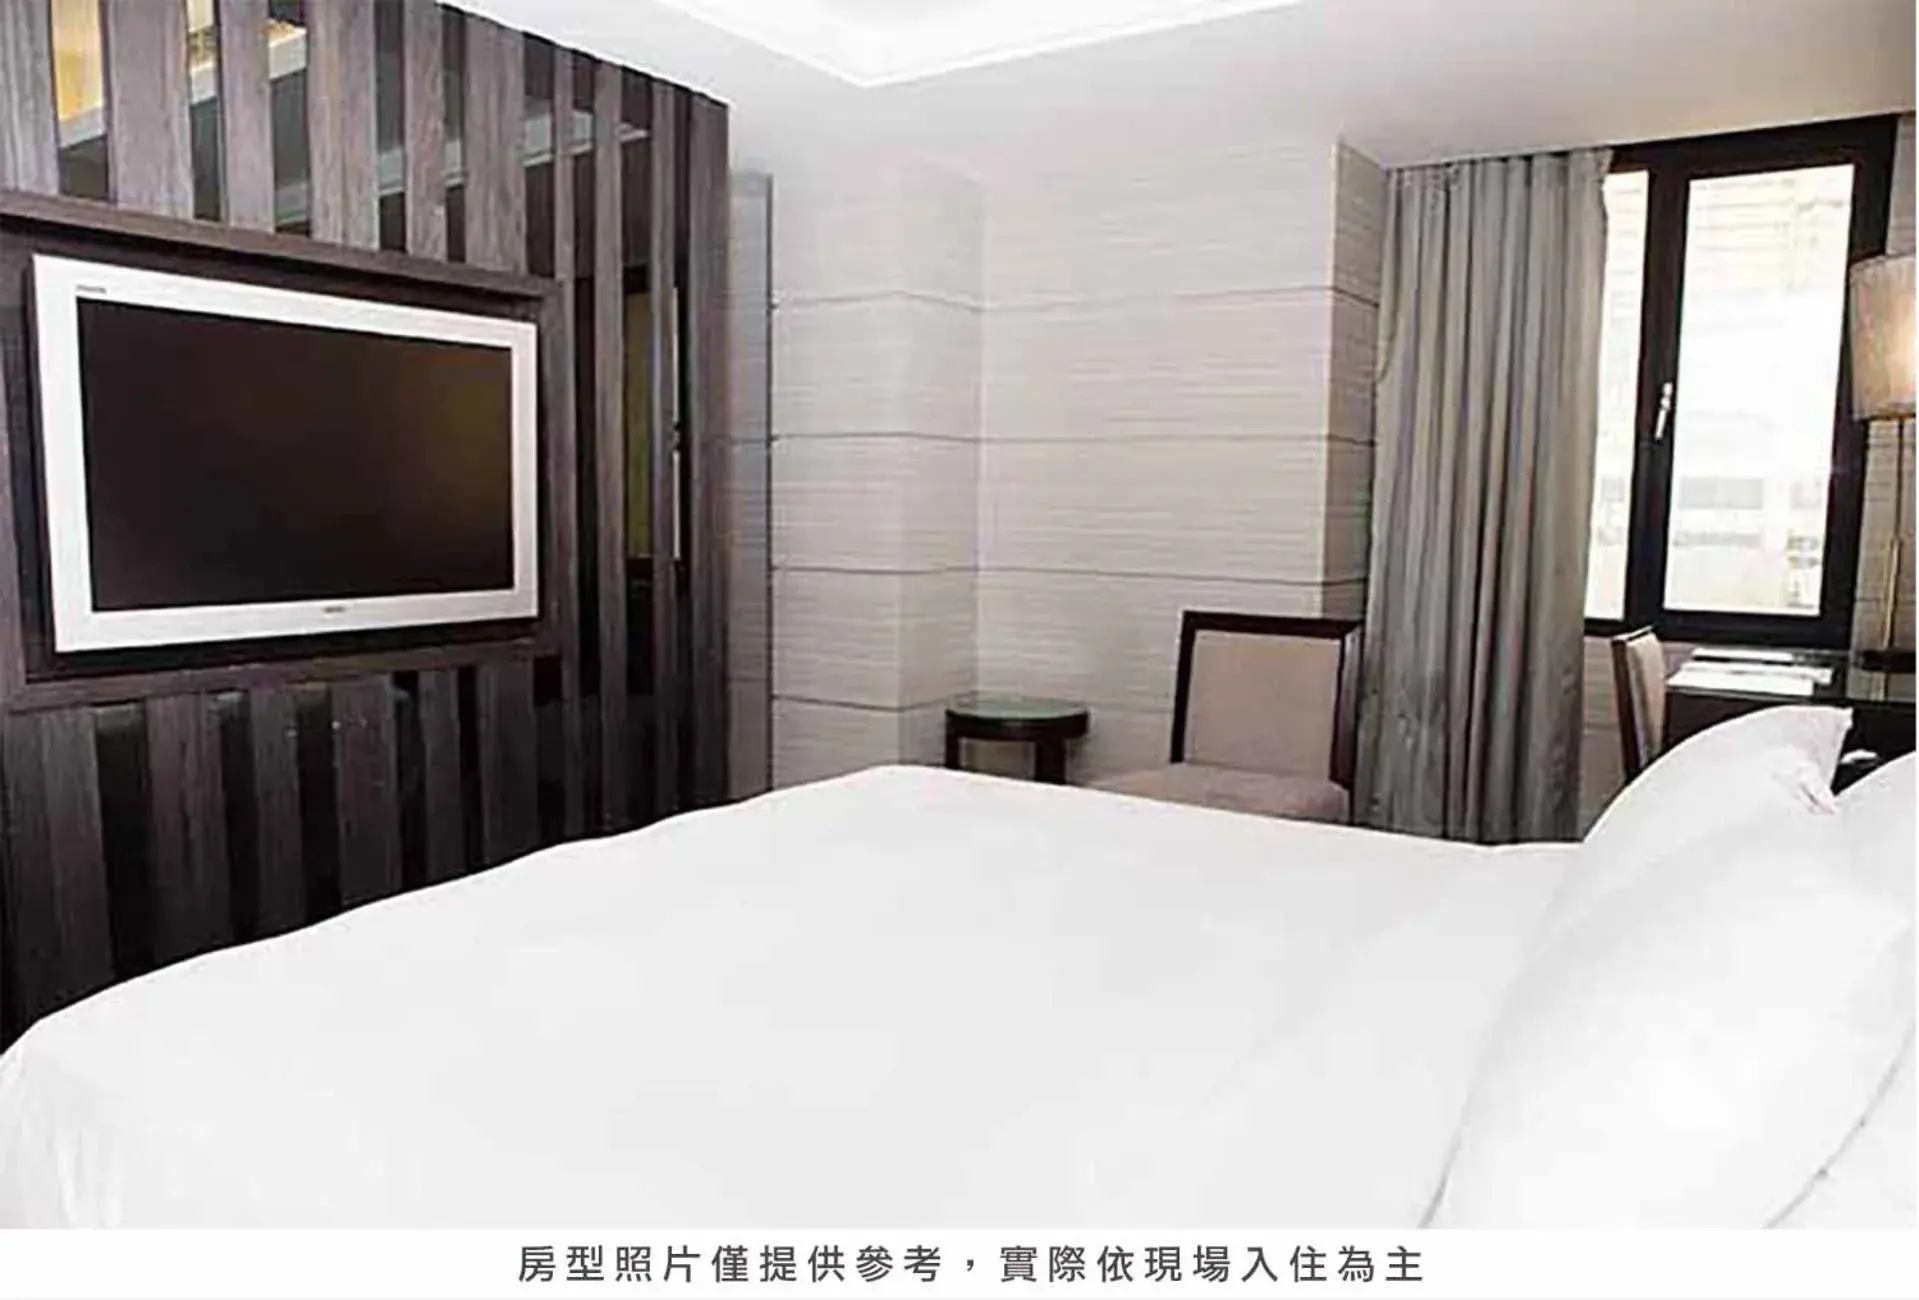 Bed in Royal Group Hotel Chun Shan Branch